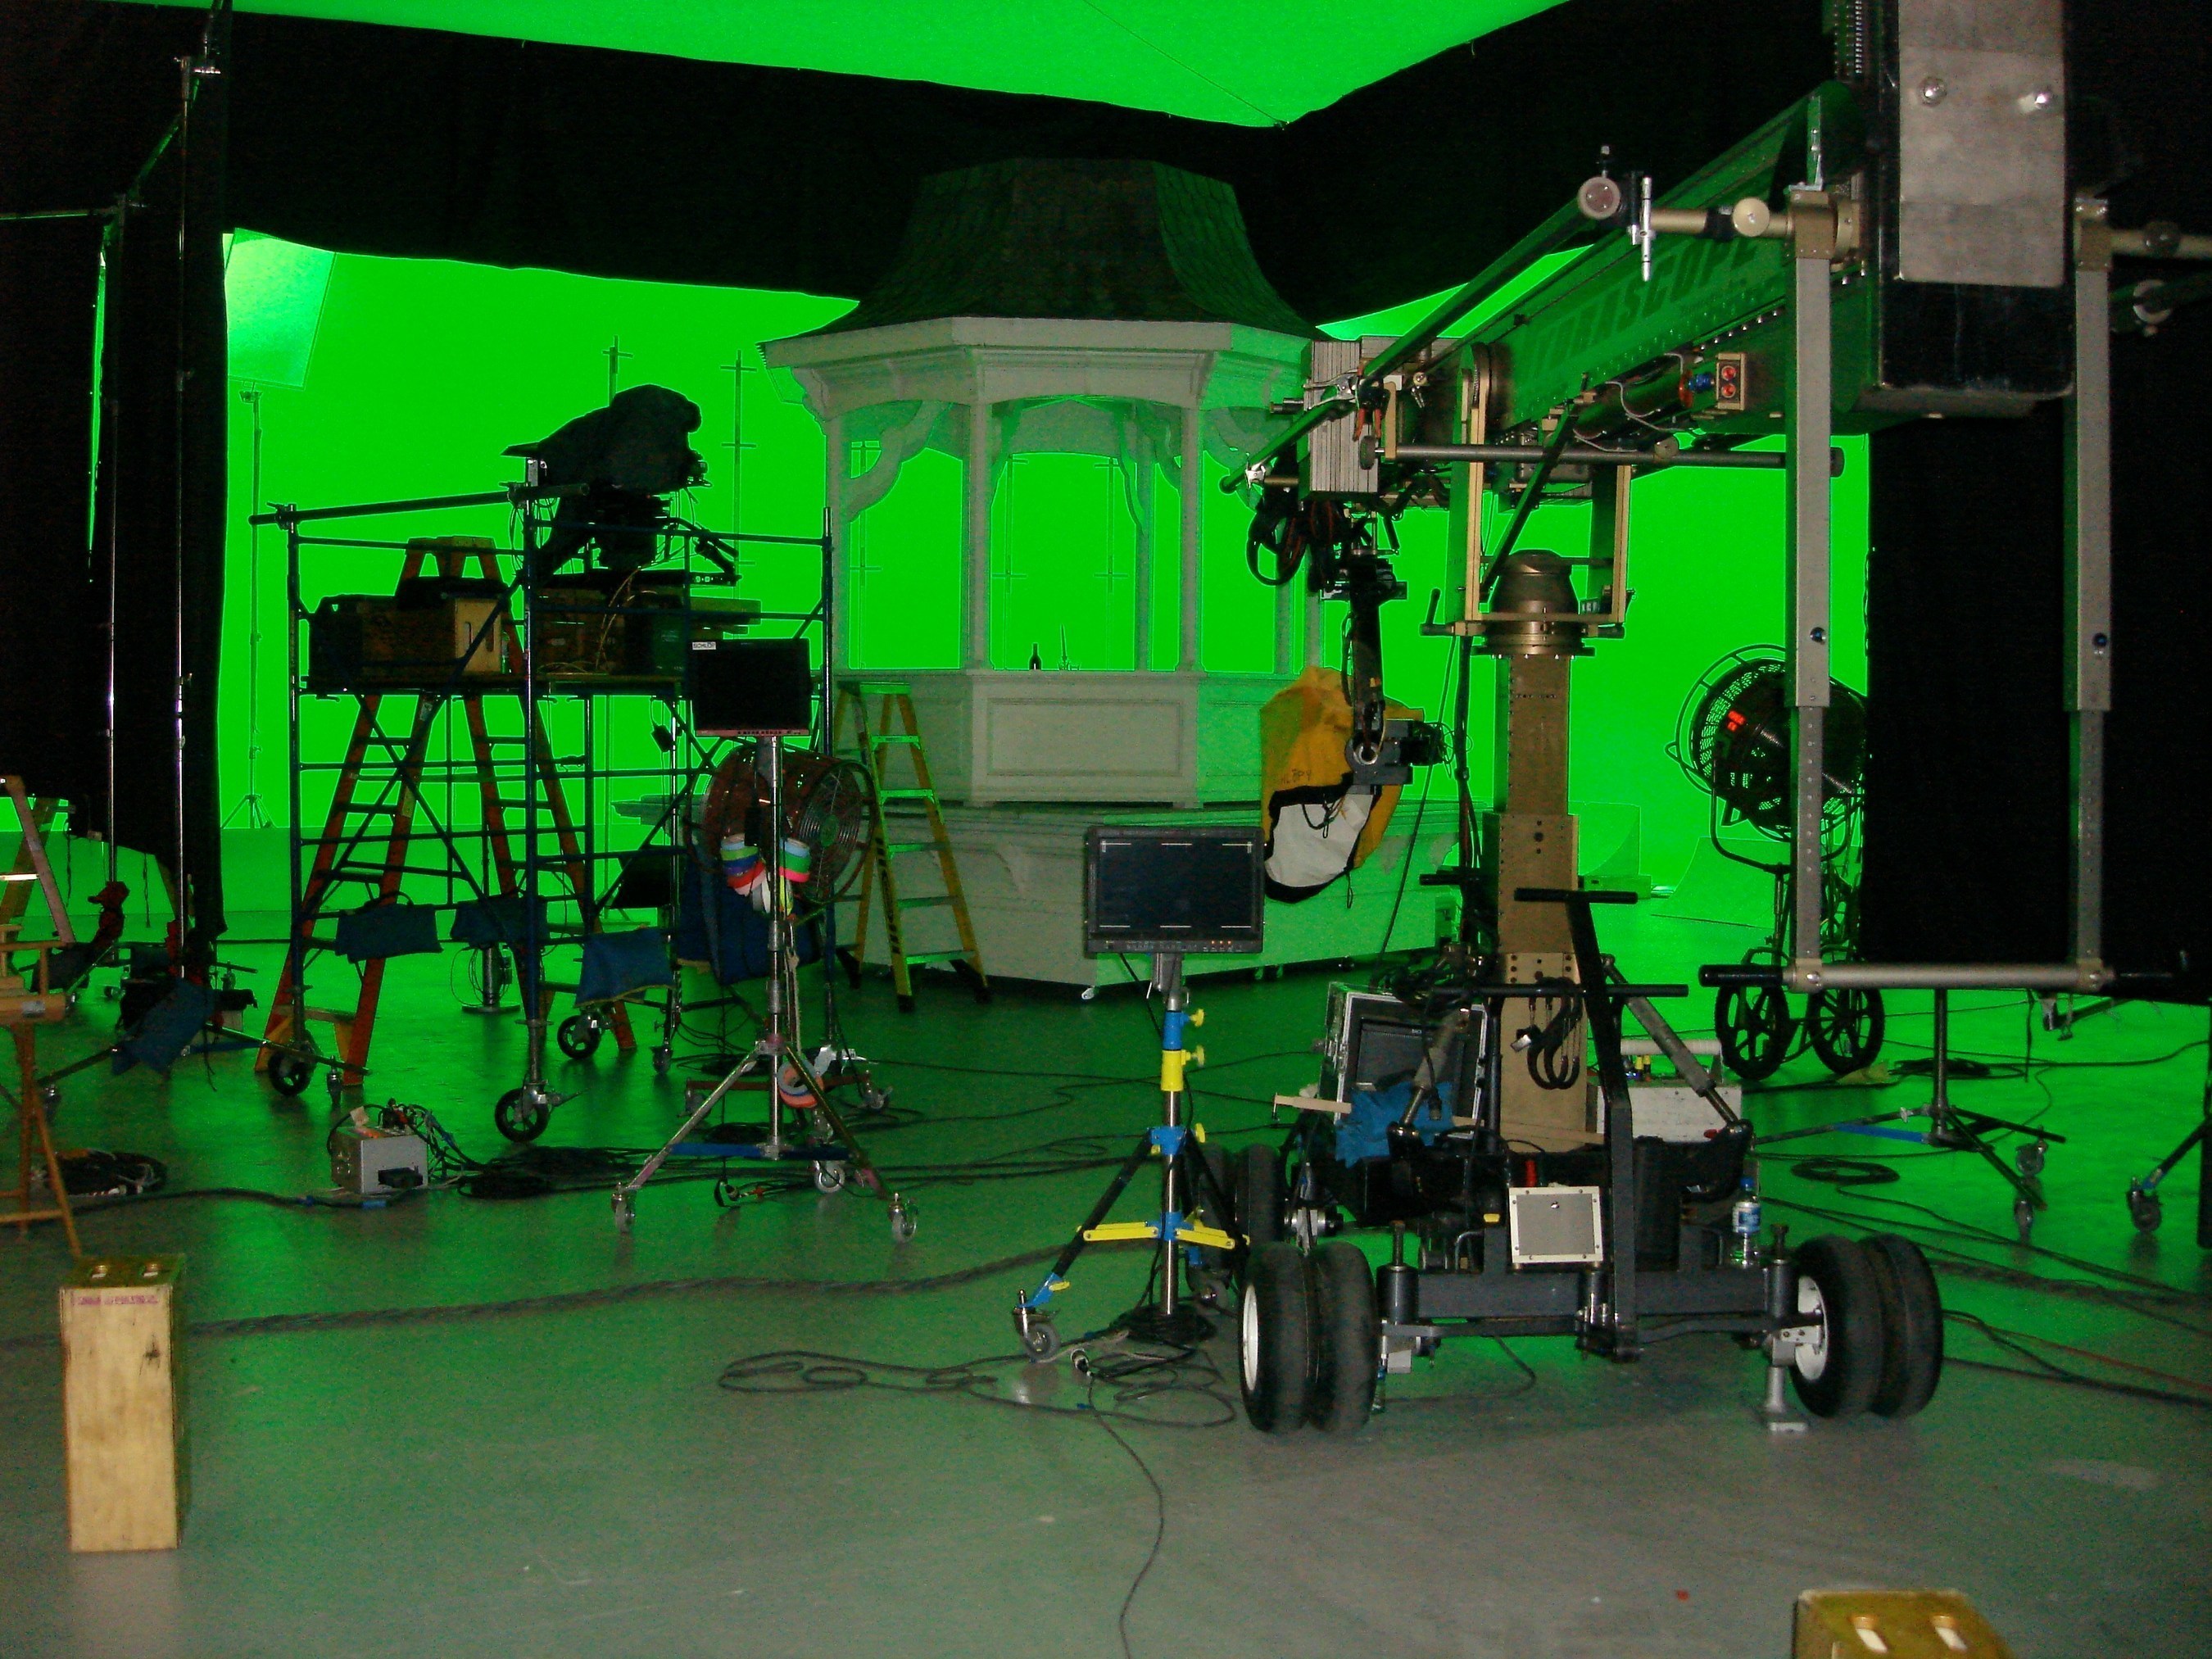 Santa Fe University of Art & Design's Garson Studios' Stage A has the largest permanent green screen in the state of New Mexico and students from the Film School have the unique opportunity to intern on professional productions on all three soundstages alongside Hollywood professionals.